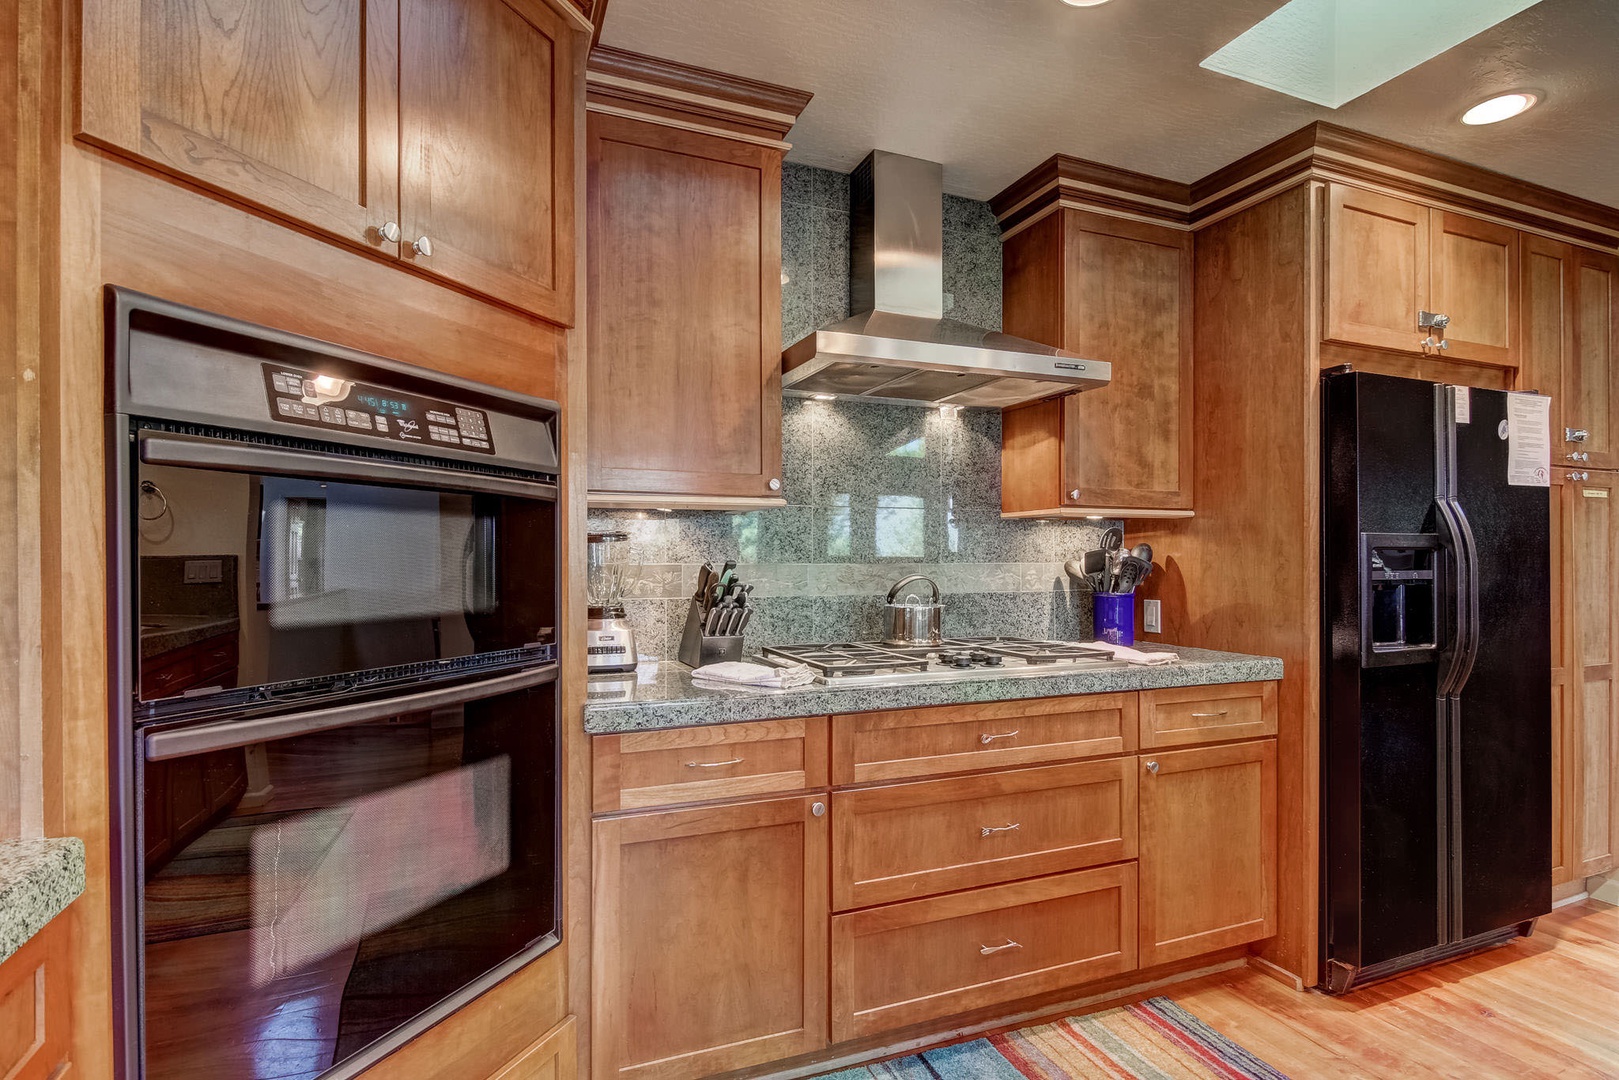 Full kitchen with double ovens, toaster, coffee maker and more!